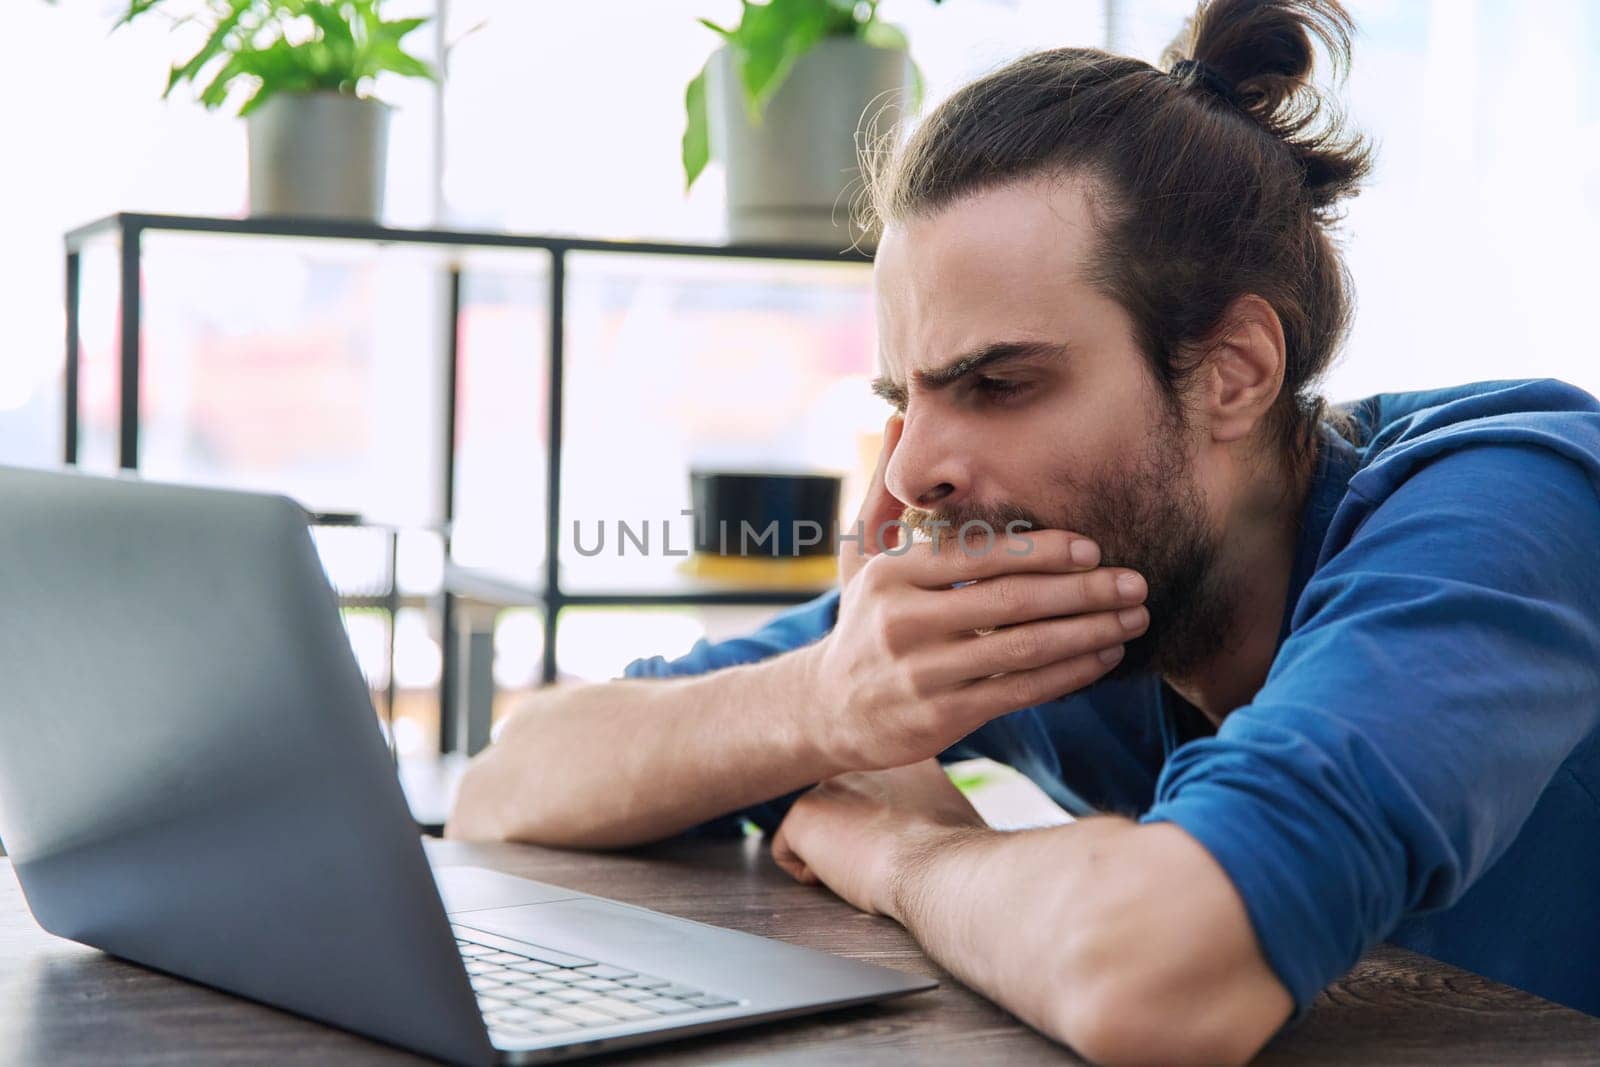 Young tired sleepy man looking at laptop computer, yawning covering his mouth with hand. Fatigue, drowsiness, lifestyle concept